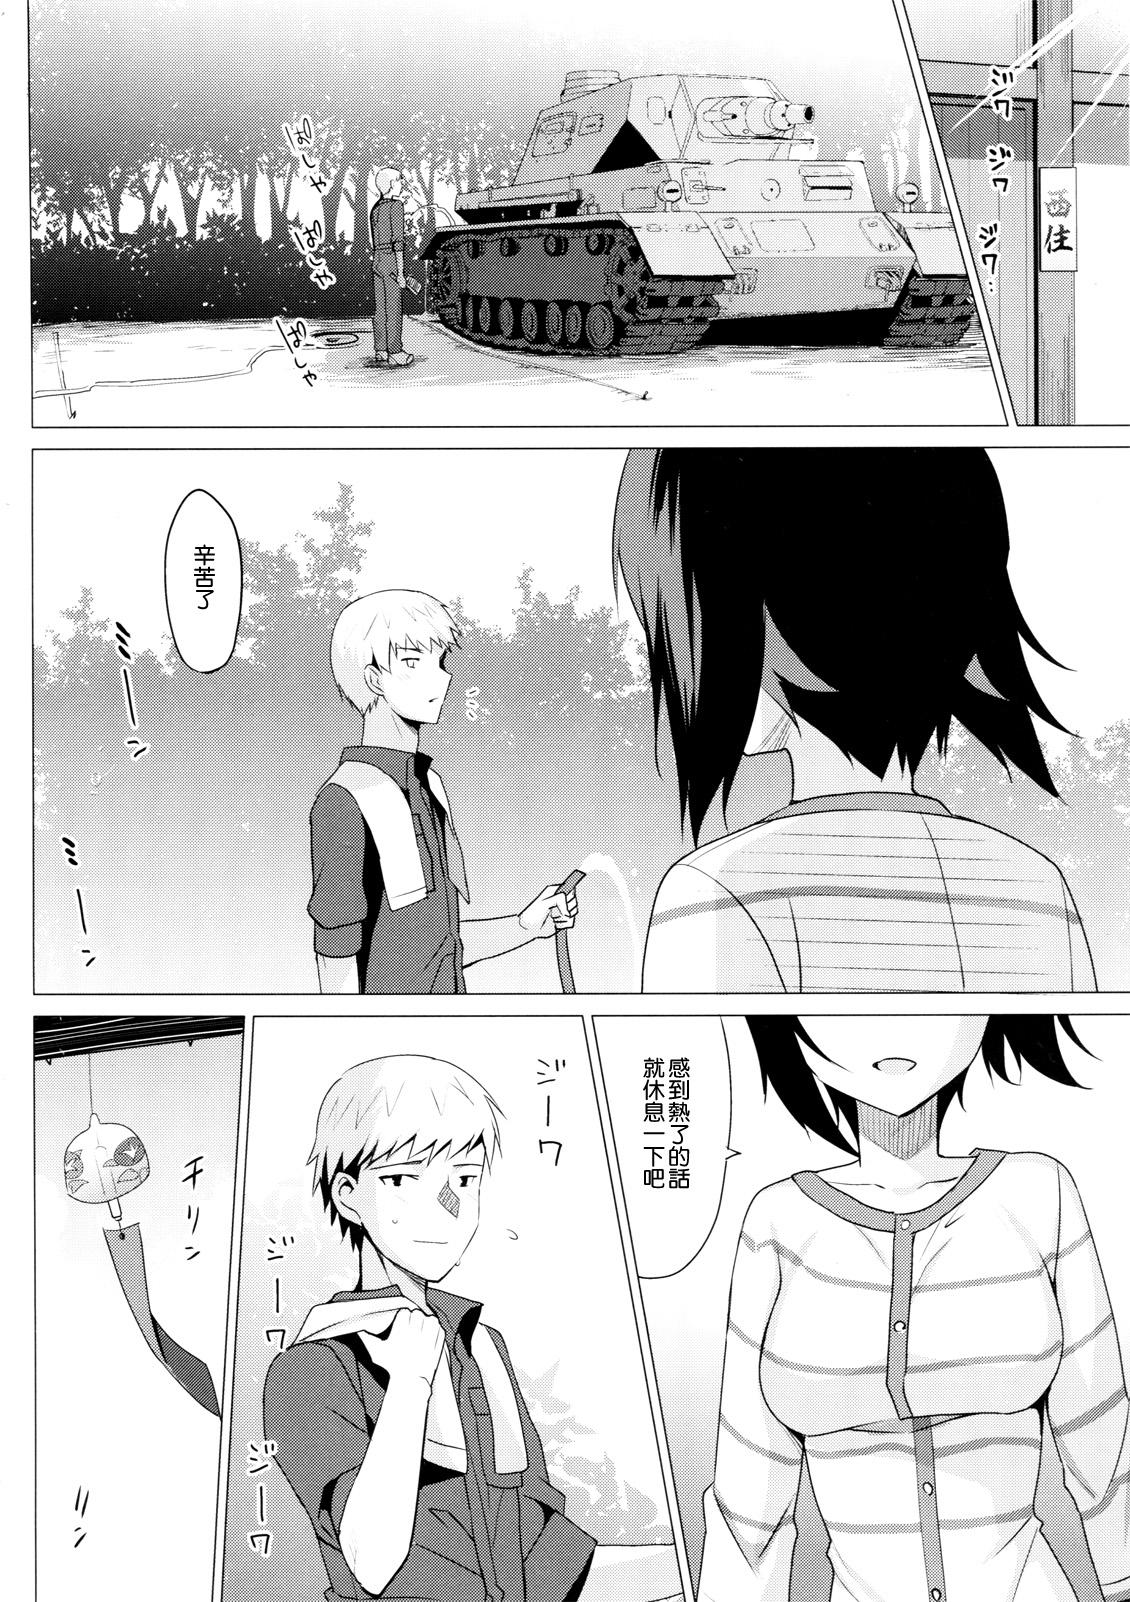 And LET ME LOVE YOU - Girls und panzer Sem Camisinha - Page 5